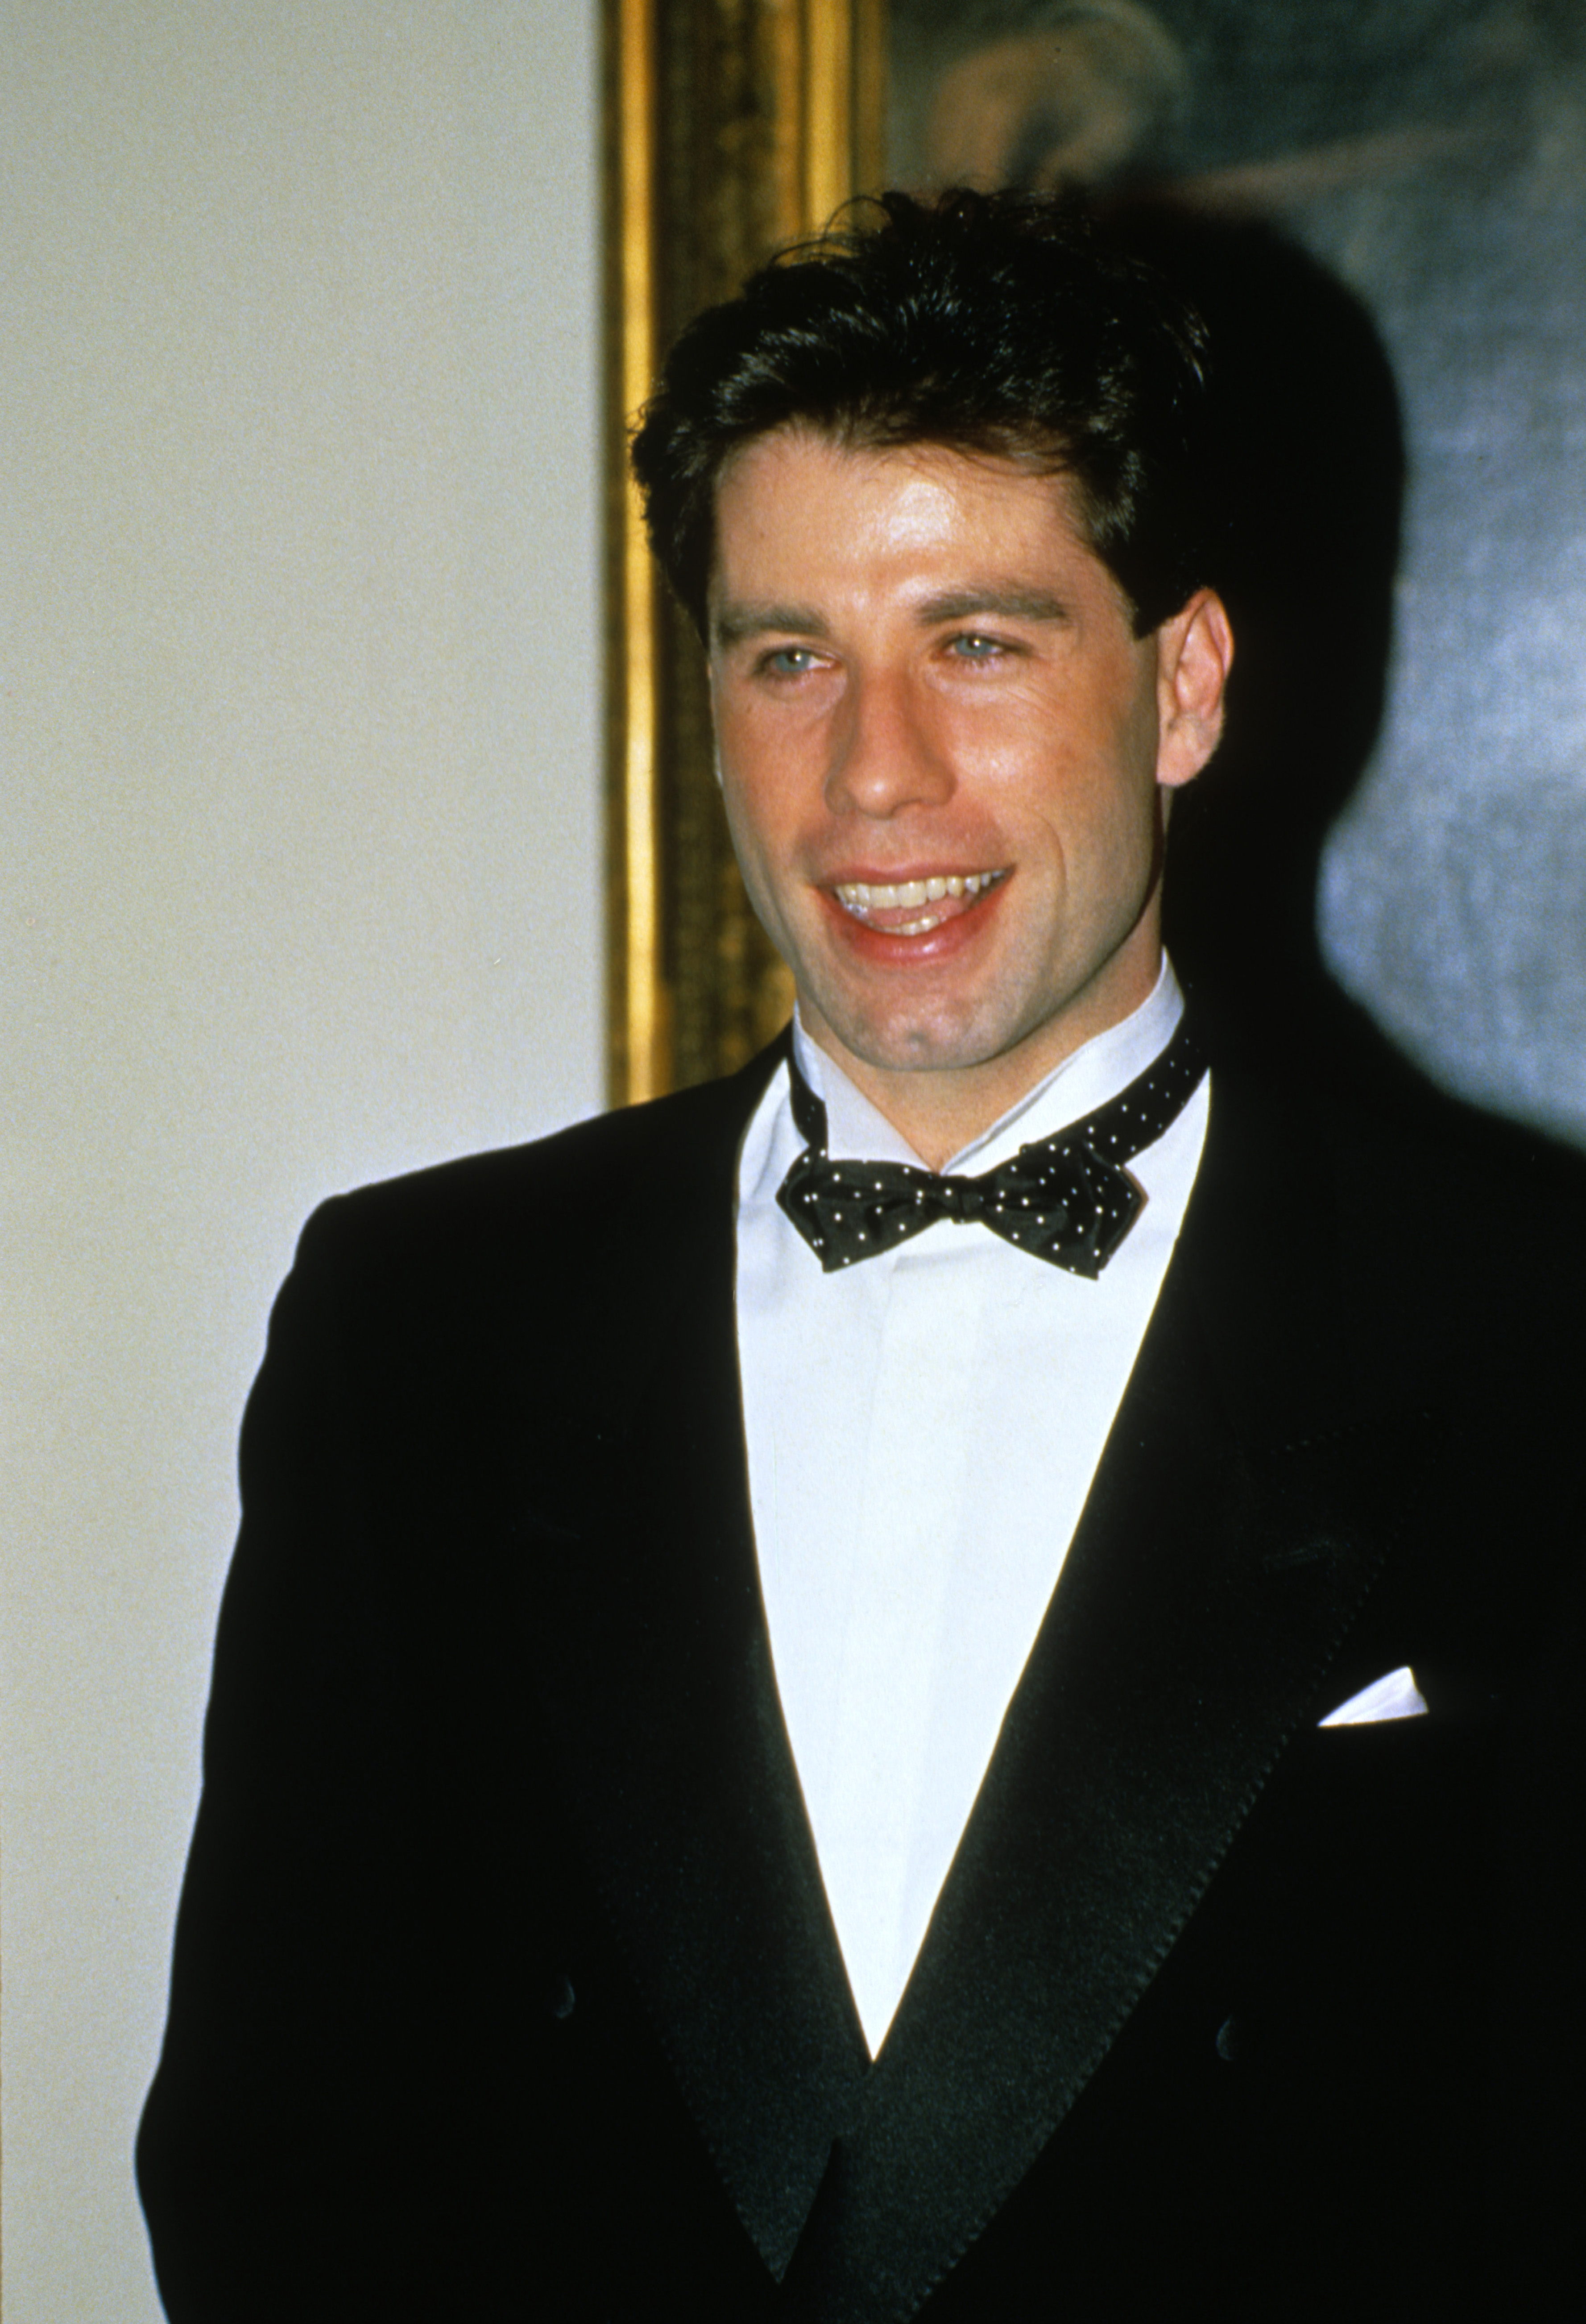 John Travolta visits the White House on November 9, 1985 | Source: Getty Images